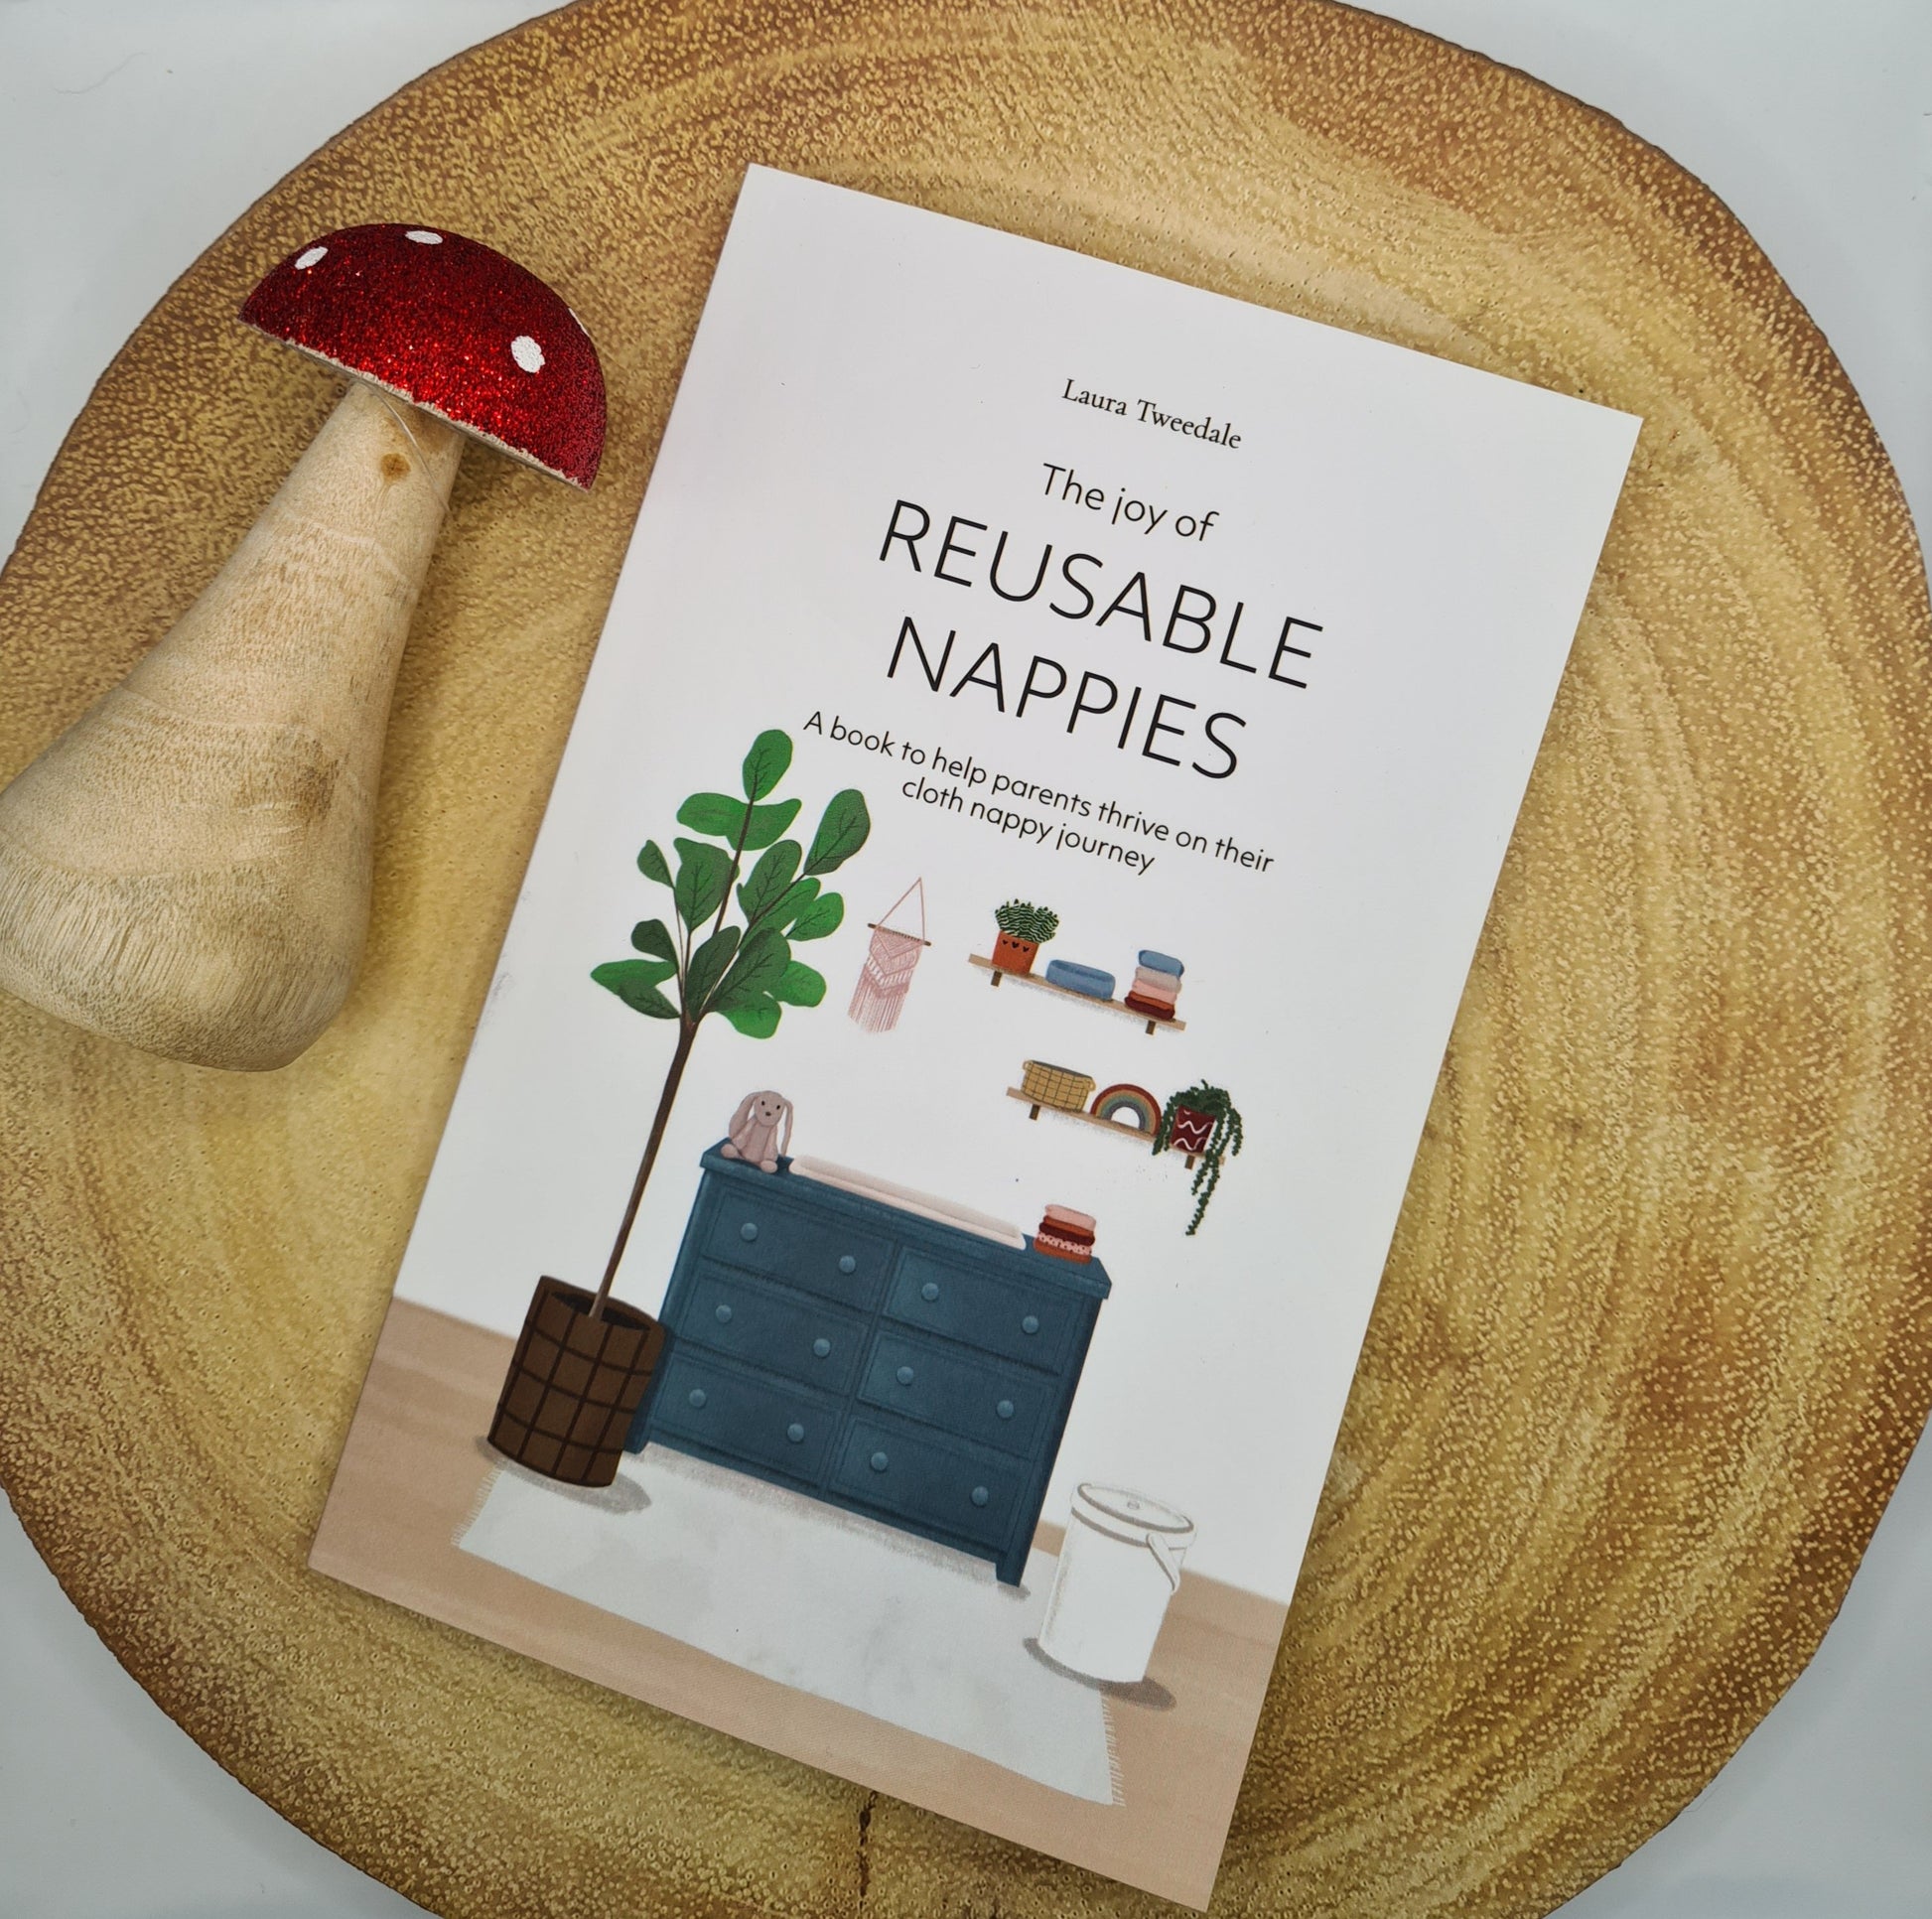 A book about using reussable cloth nappies